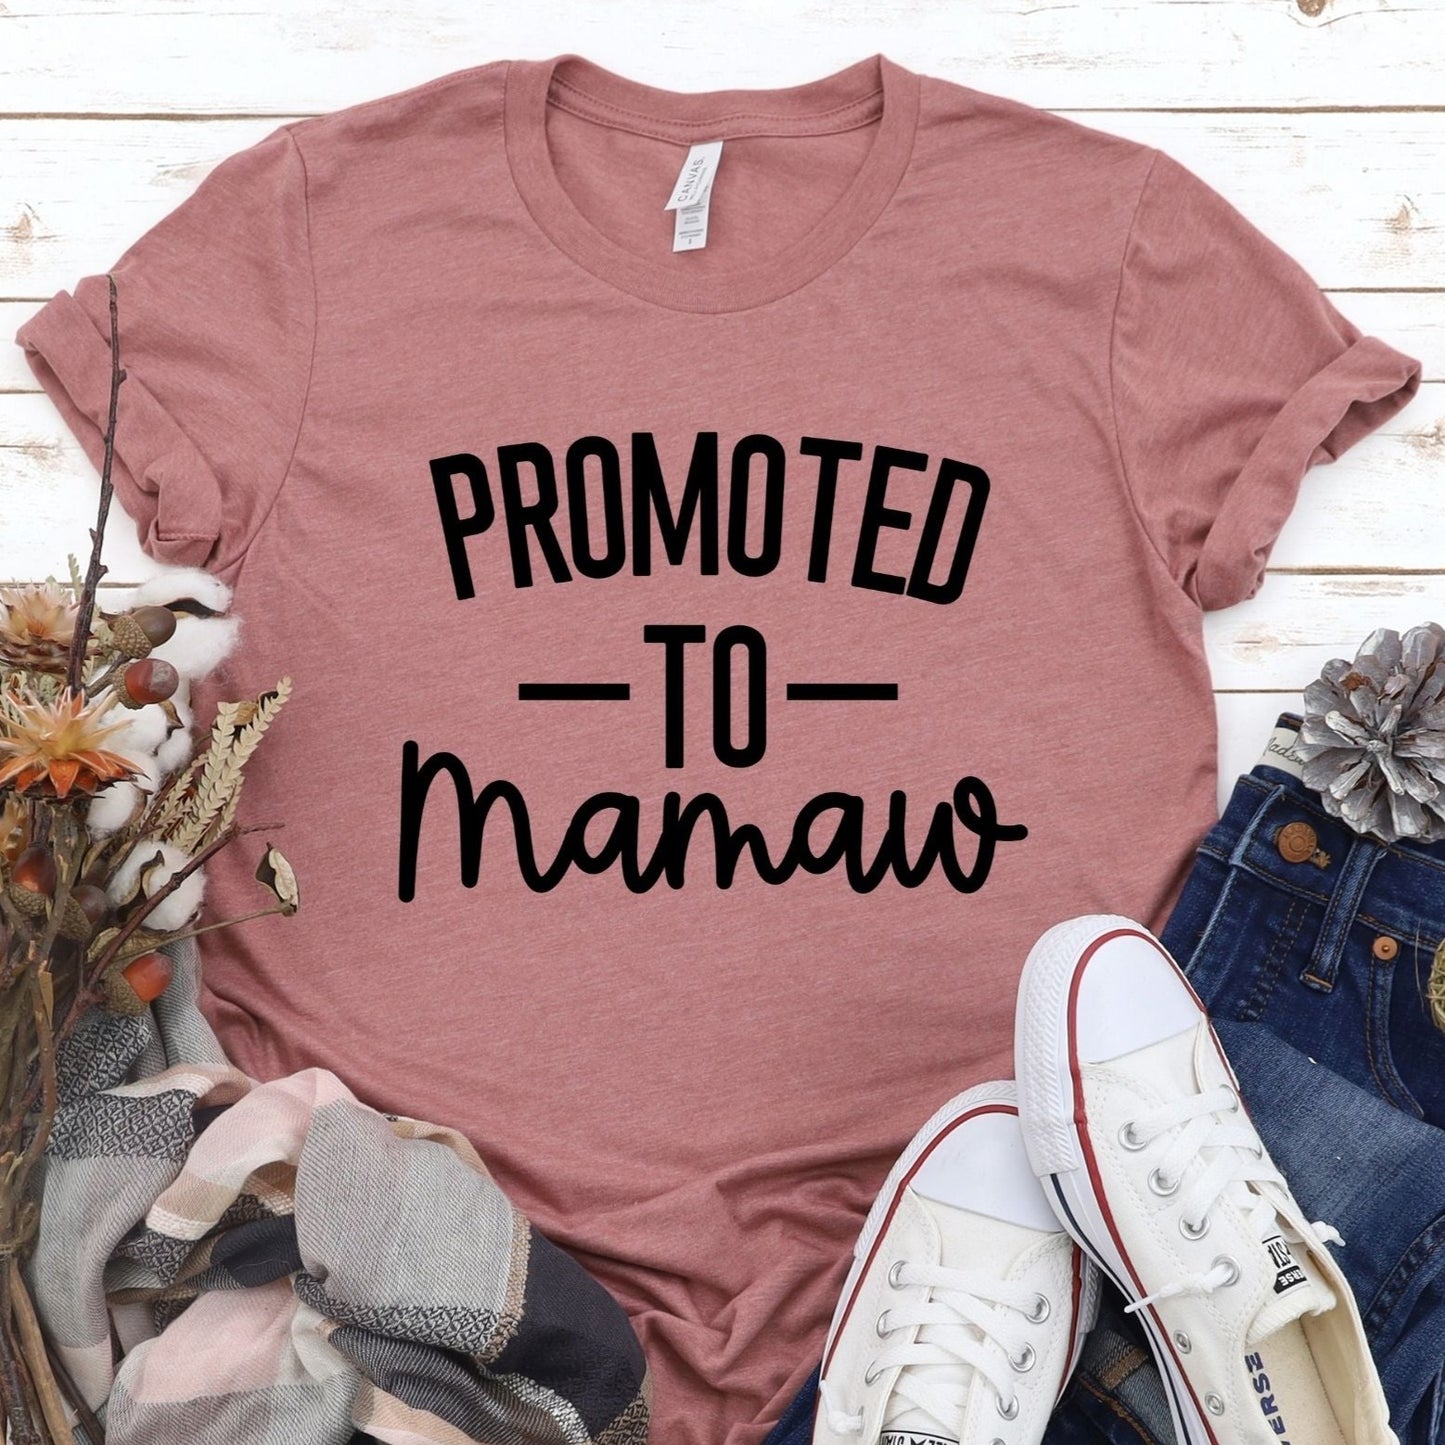 Promoted to Mamaw